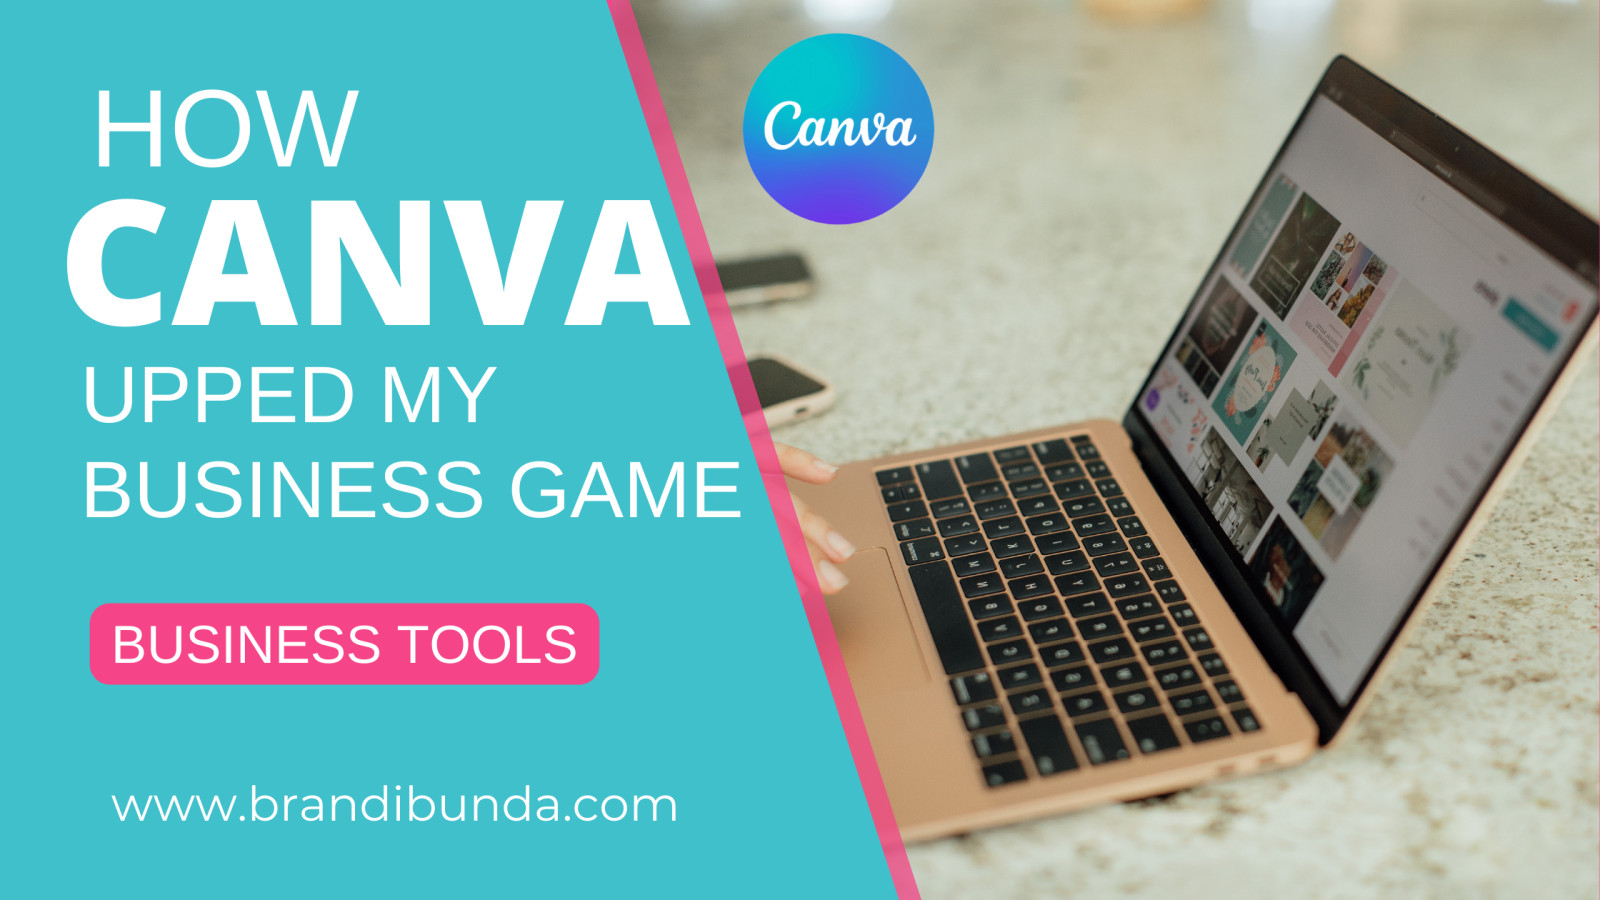 How Canva Upped My Business Game